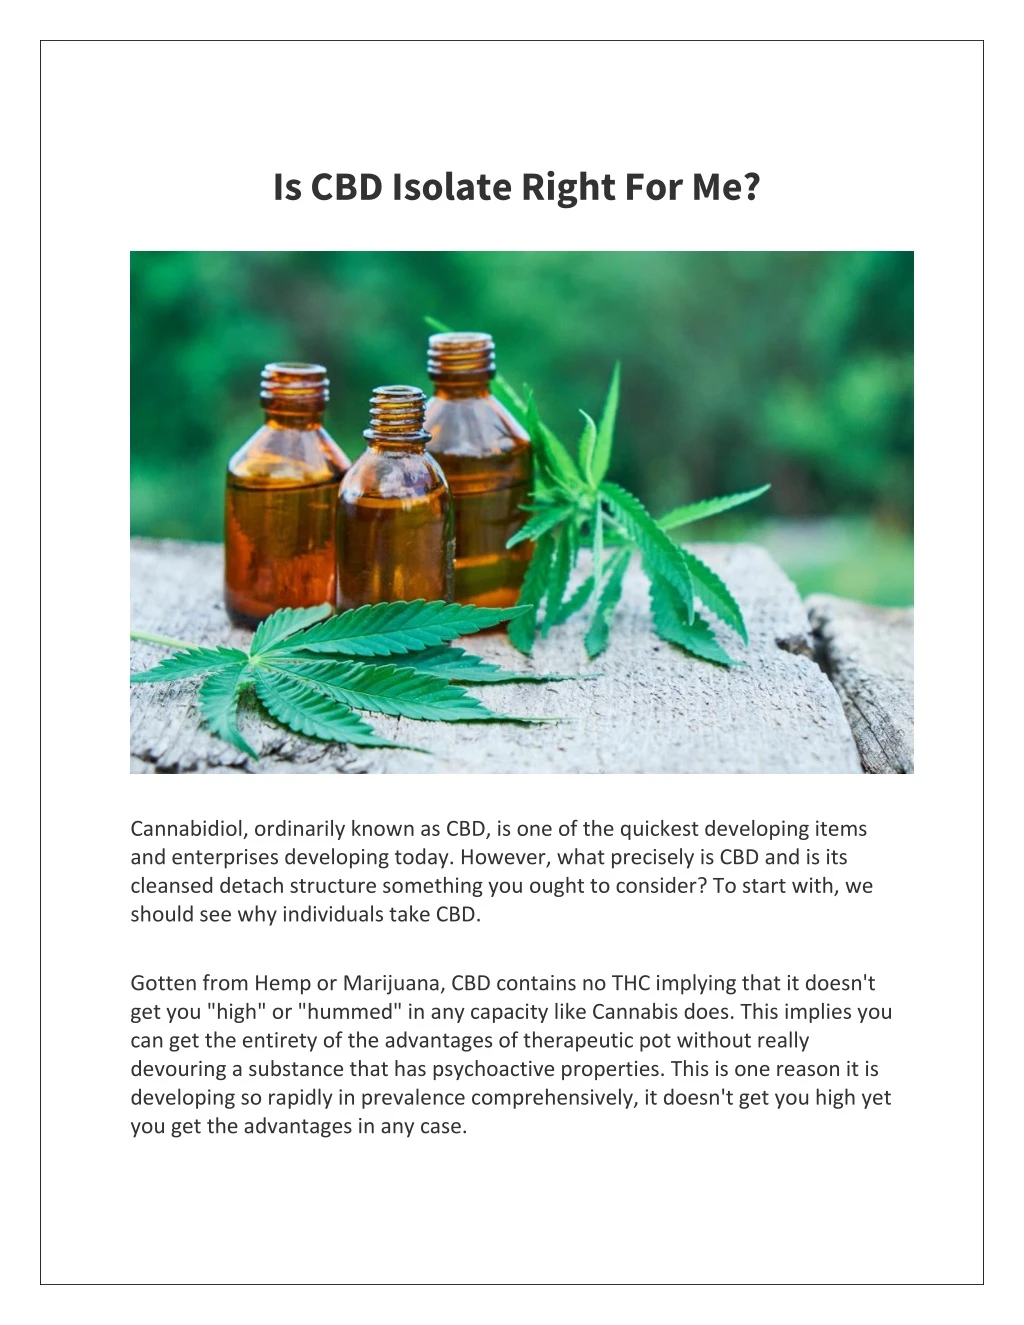 is cbd isolate right for me